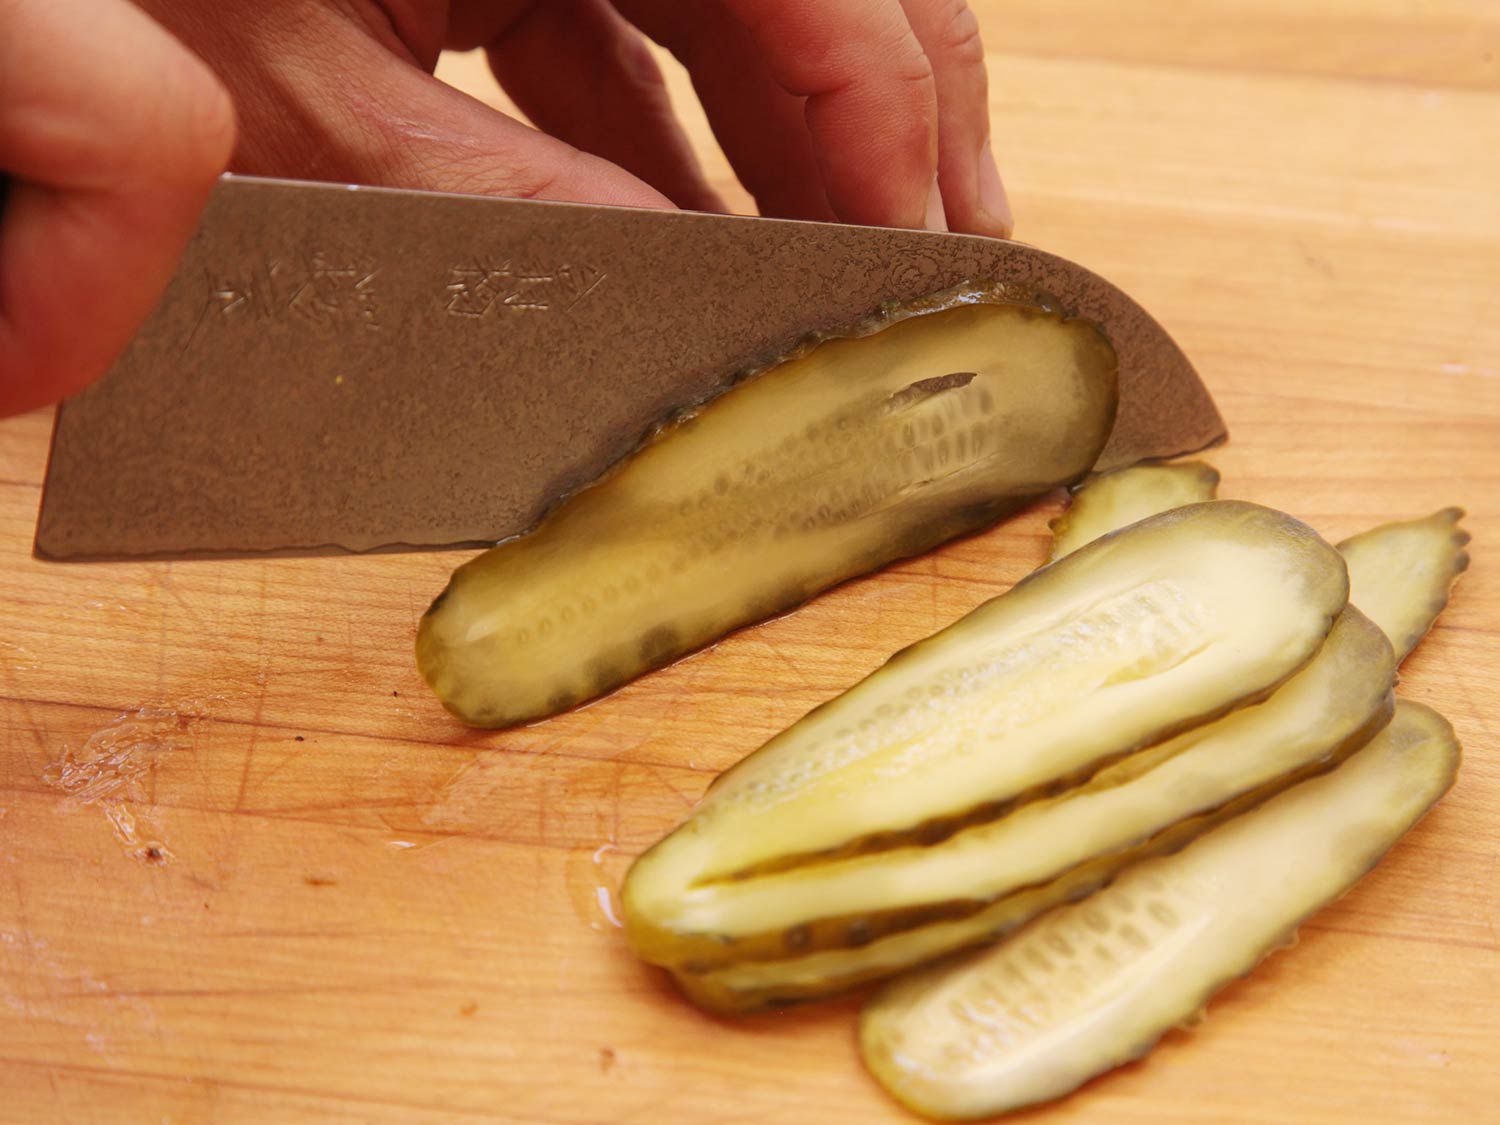 A pickle being sliced along its length with a chef's knife.